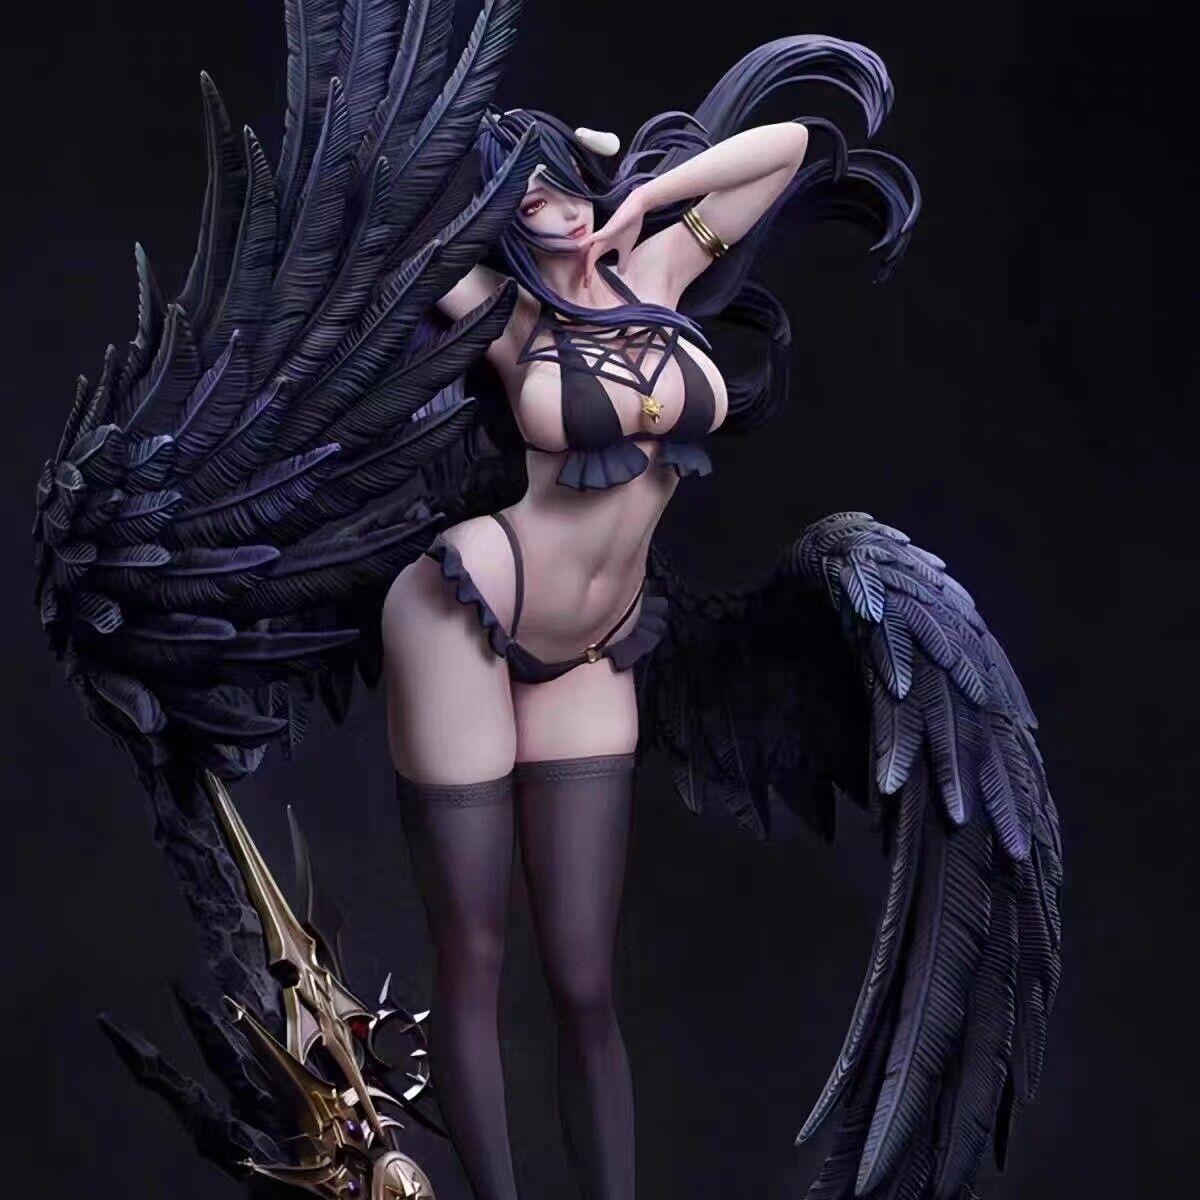 pre-sell New Overlord Albedo Statue GK Collection Figure PVC Action Figures 56cm